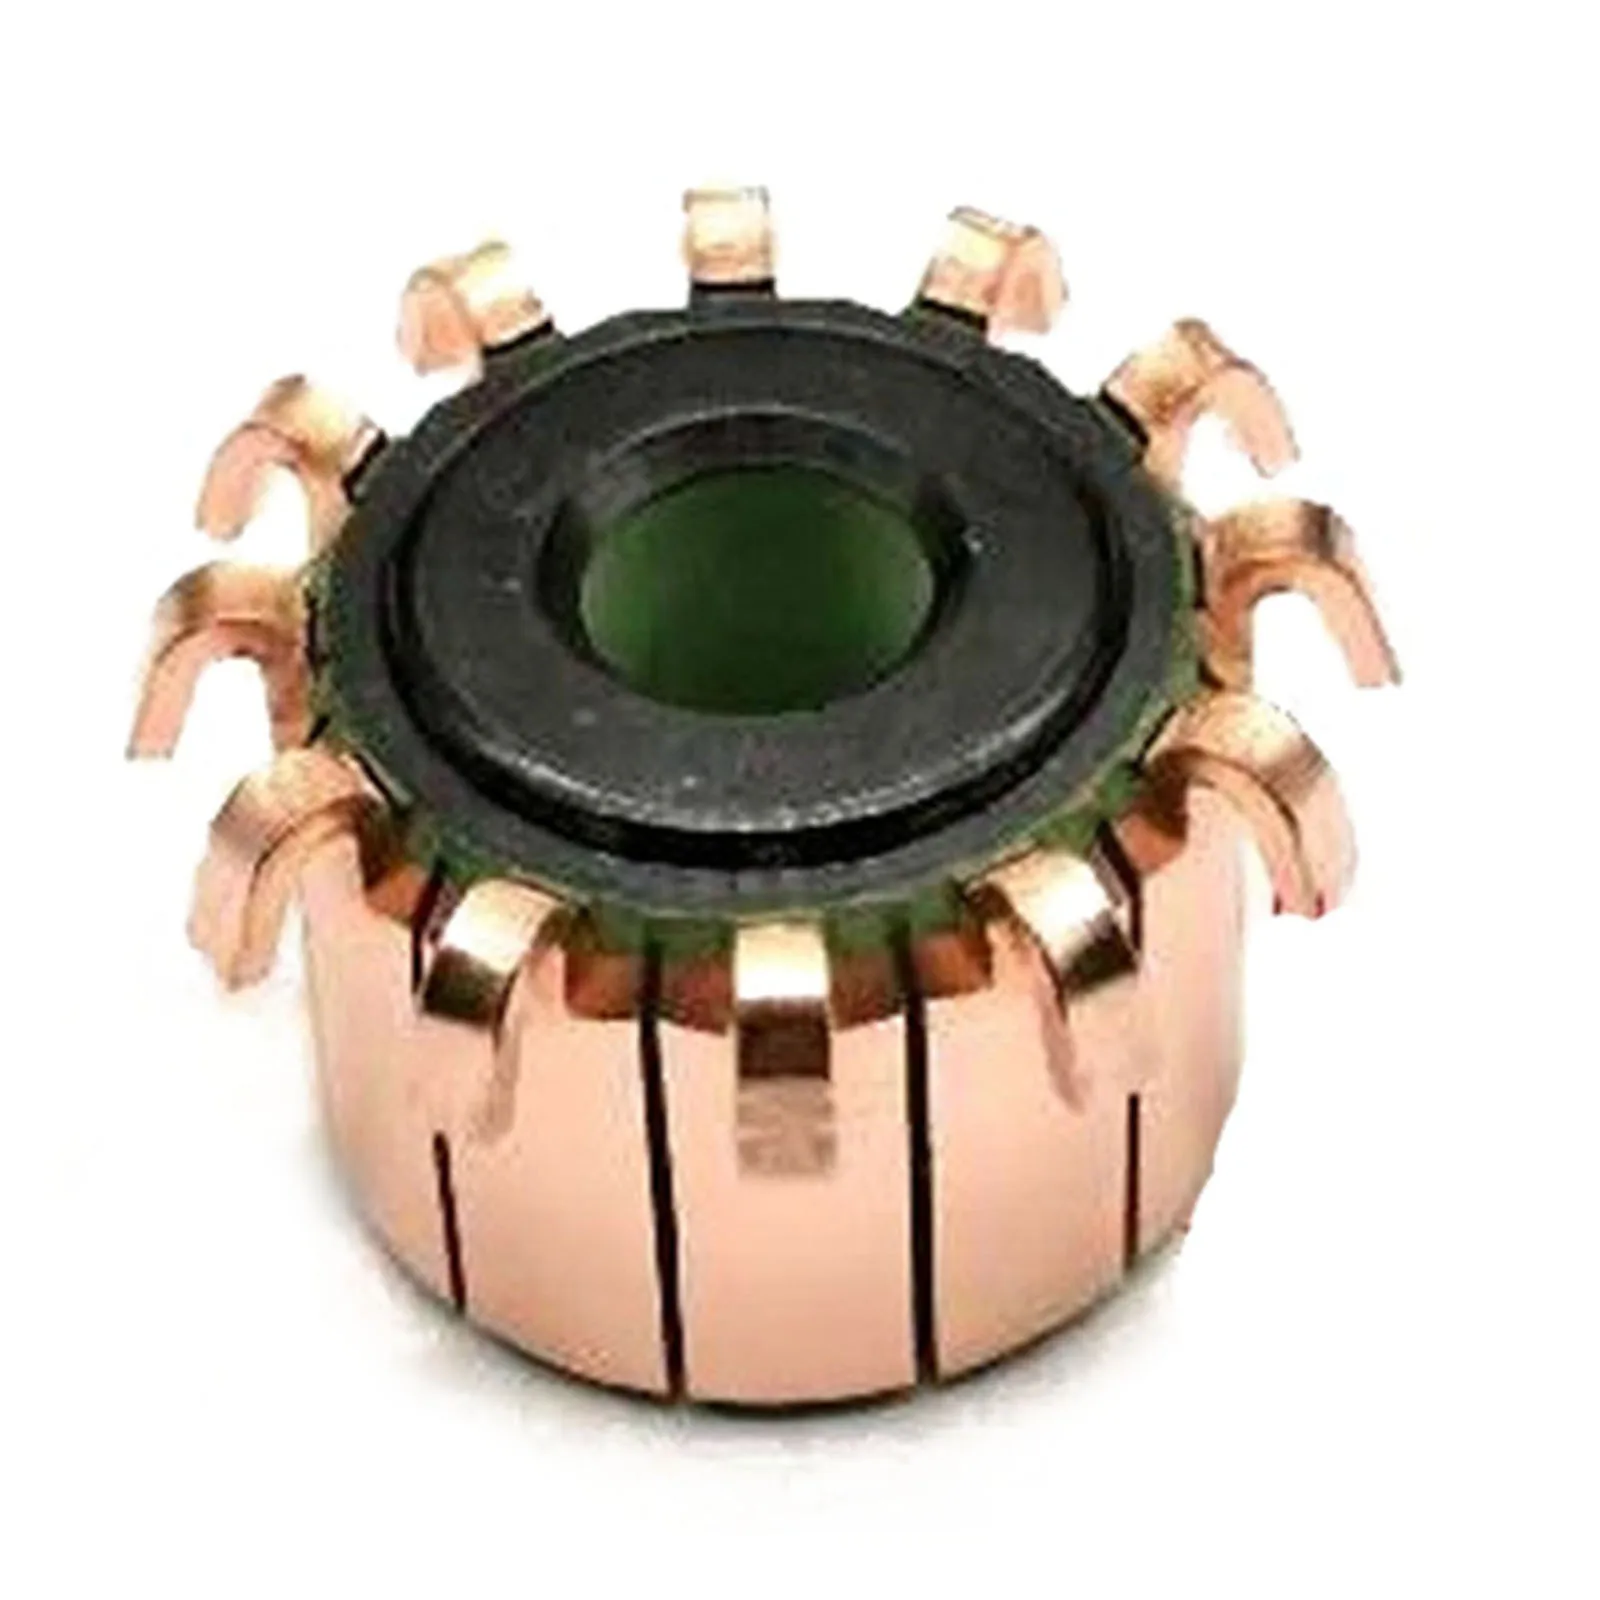 1pc 12P Teeth Copper Hook Type Electrical Motor Commutator CHY-3389-12 For Power Tools High-speed DC Motors Commutator 8x23x17mm 2232222 1pc chy 3389 12 electrical motor commutator 12p teeth copper hook type for power tools high speed dc motors commutator